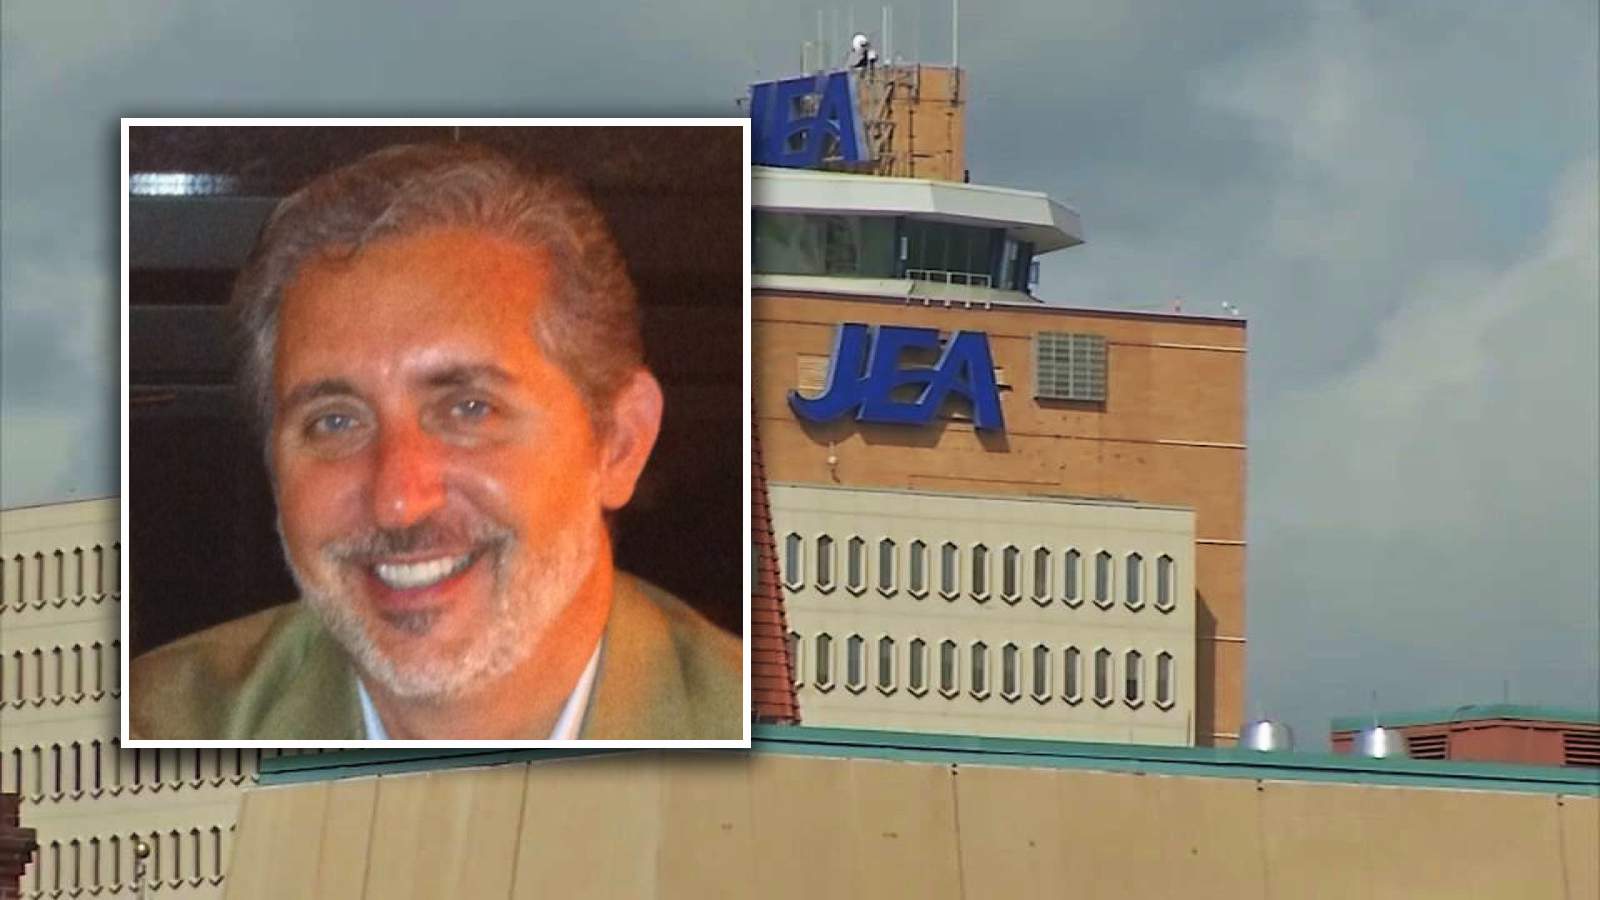 Ex-board chair name-dropped lawmaker in pitch for JEA’s business